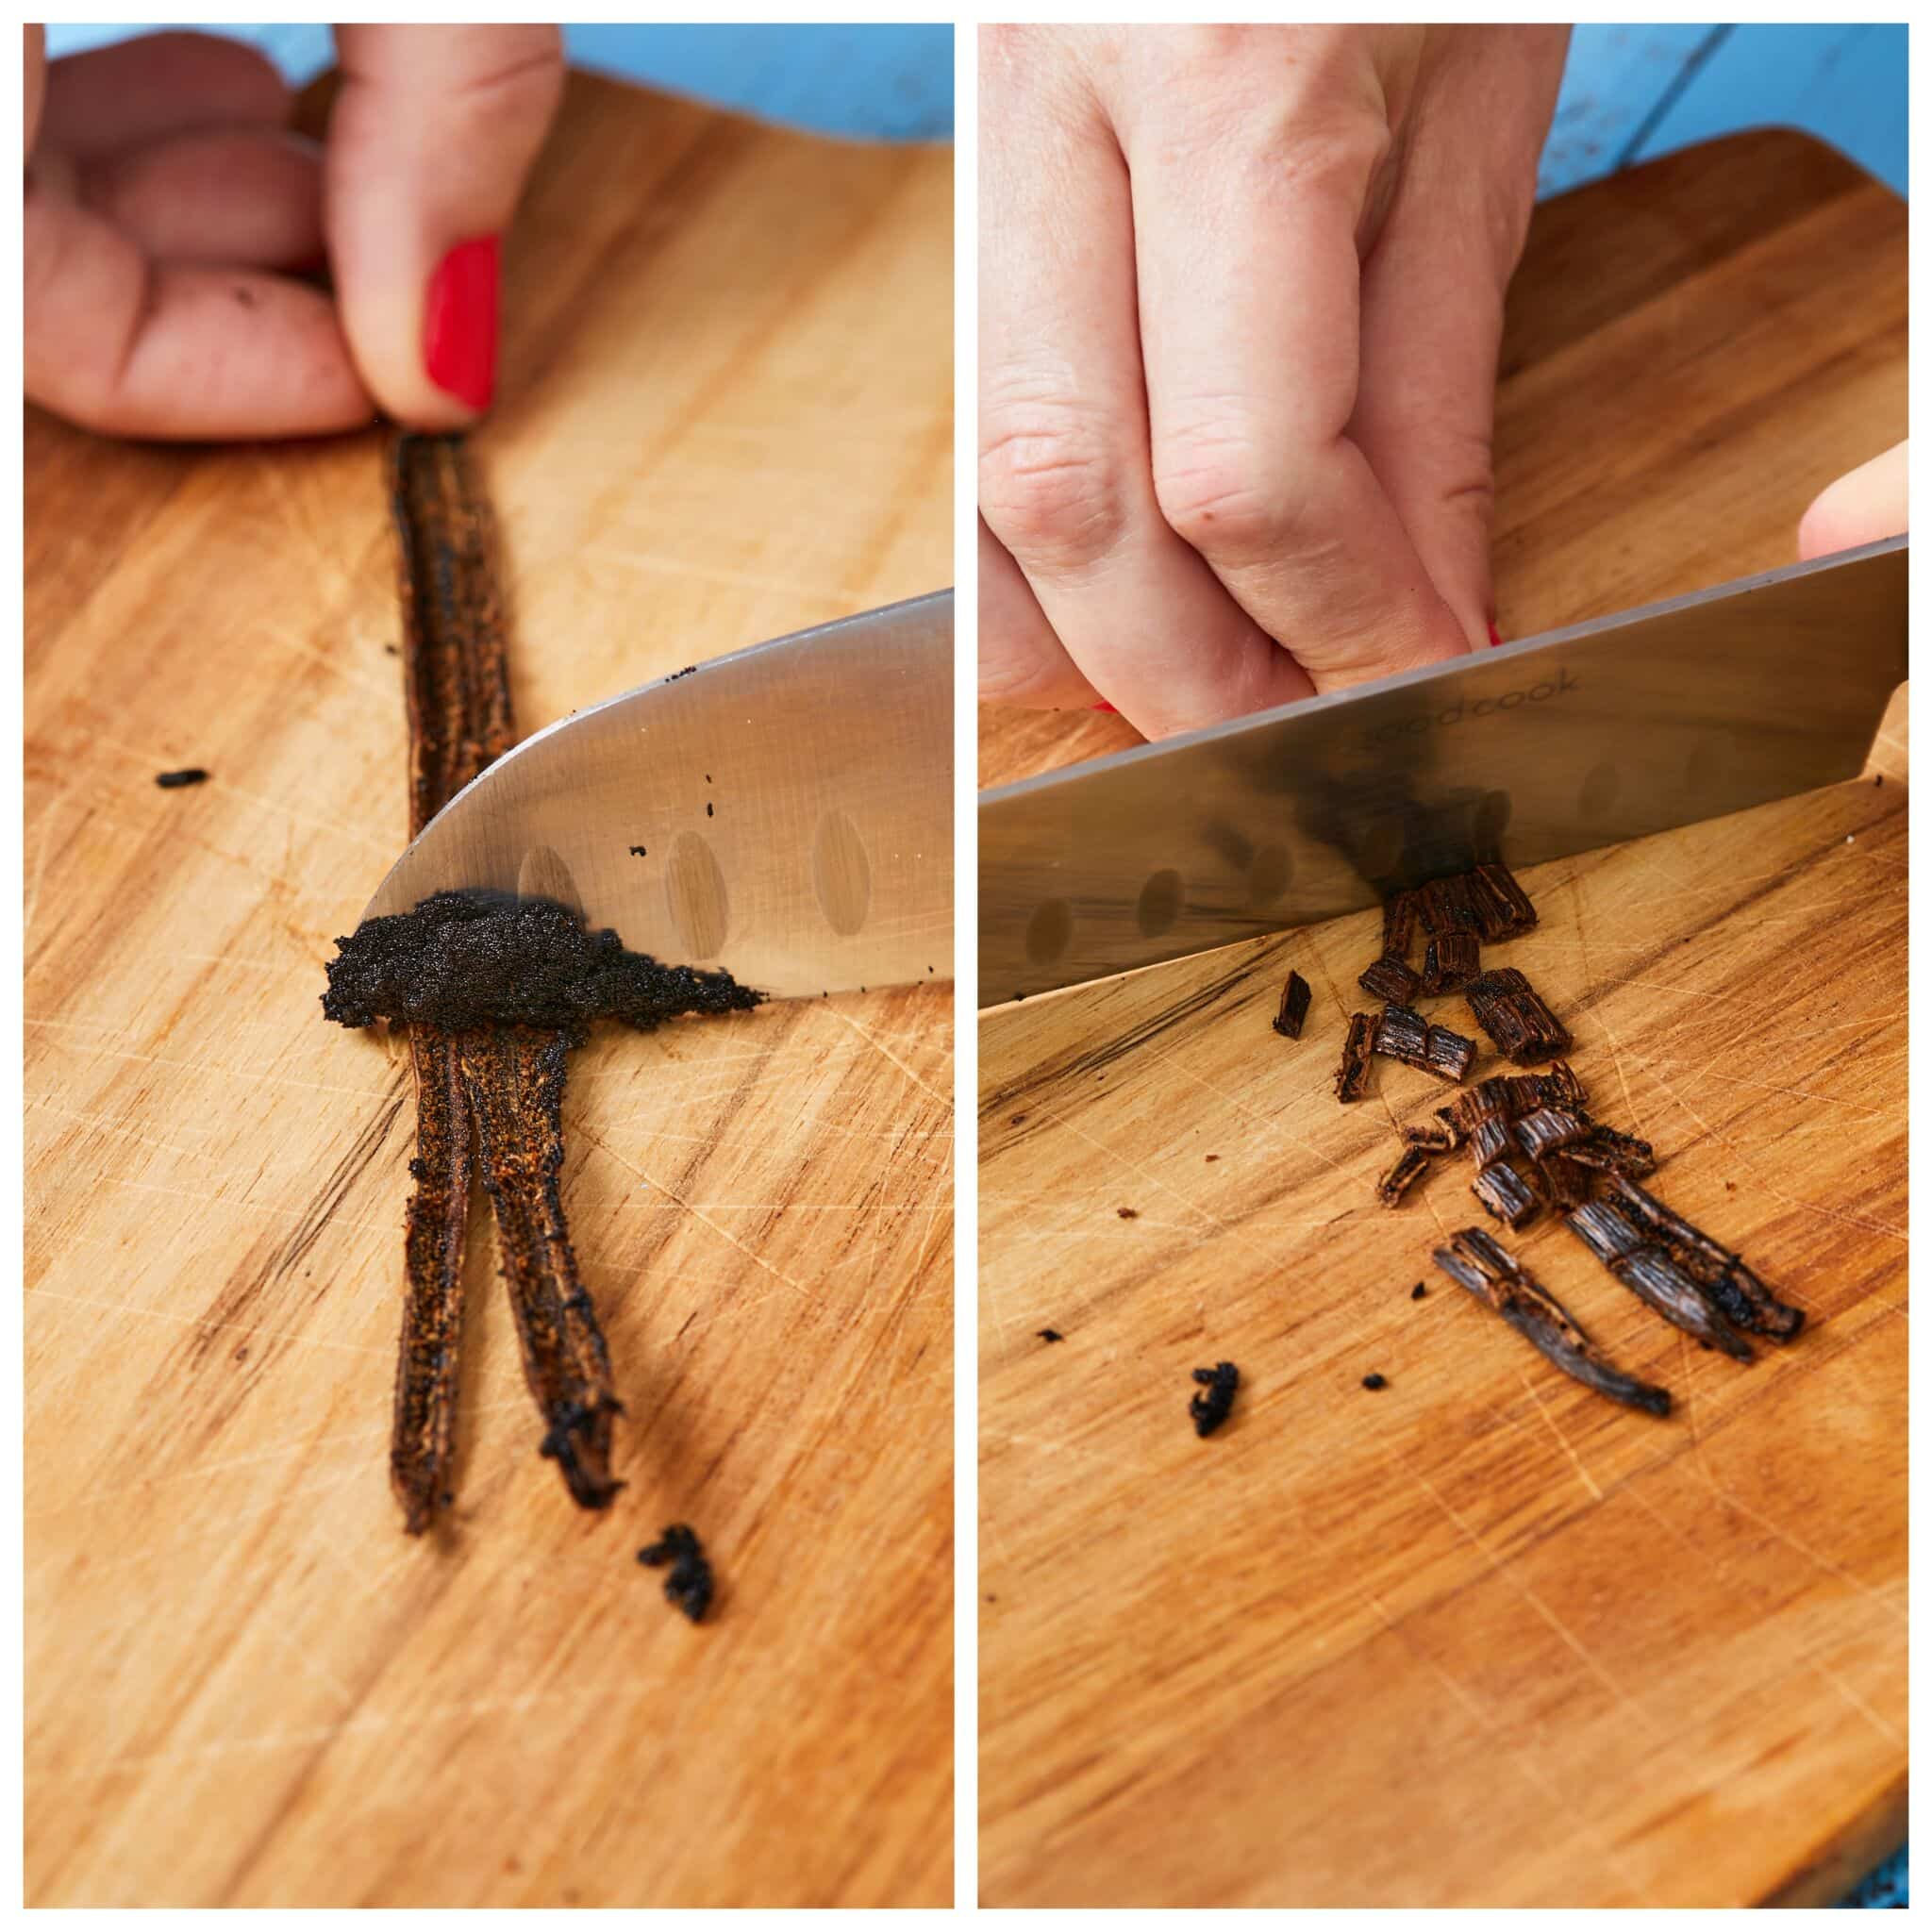 Step-by-step instructions on How to Make Vanilla Bean Paste; Cut the vanilla beans lengthwise and scrape out the seeds into a saucepan. Next, chop up the beans and add the chopped vanilla beans to the pan.